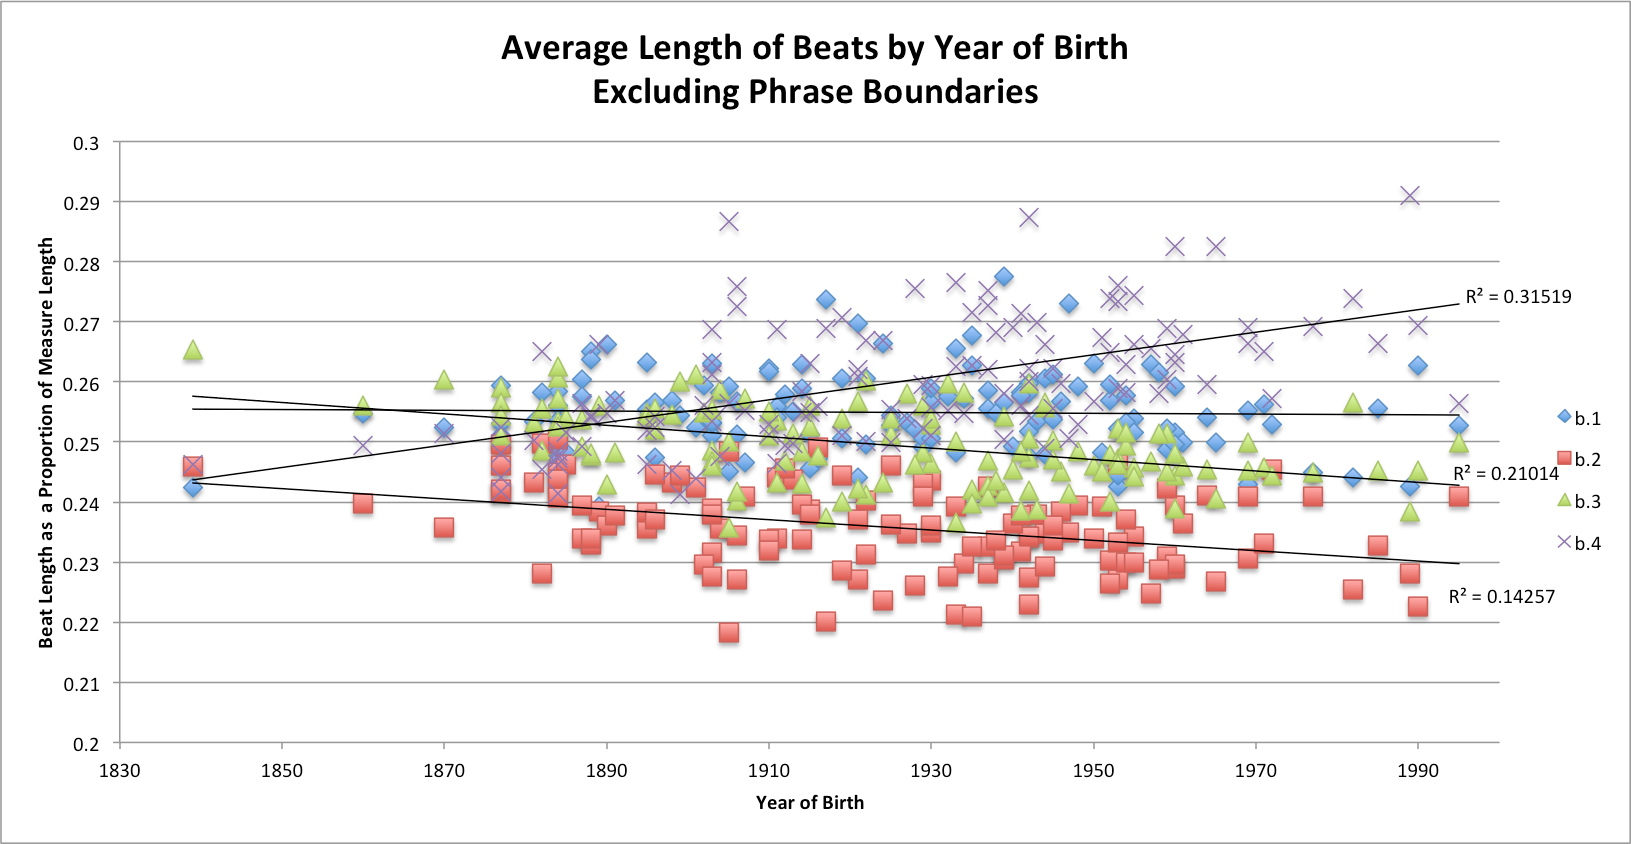 Scatterplot showing average length of beats by year of birth excluding phrase boundaries. More description below.